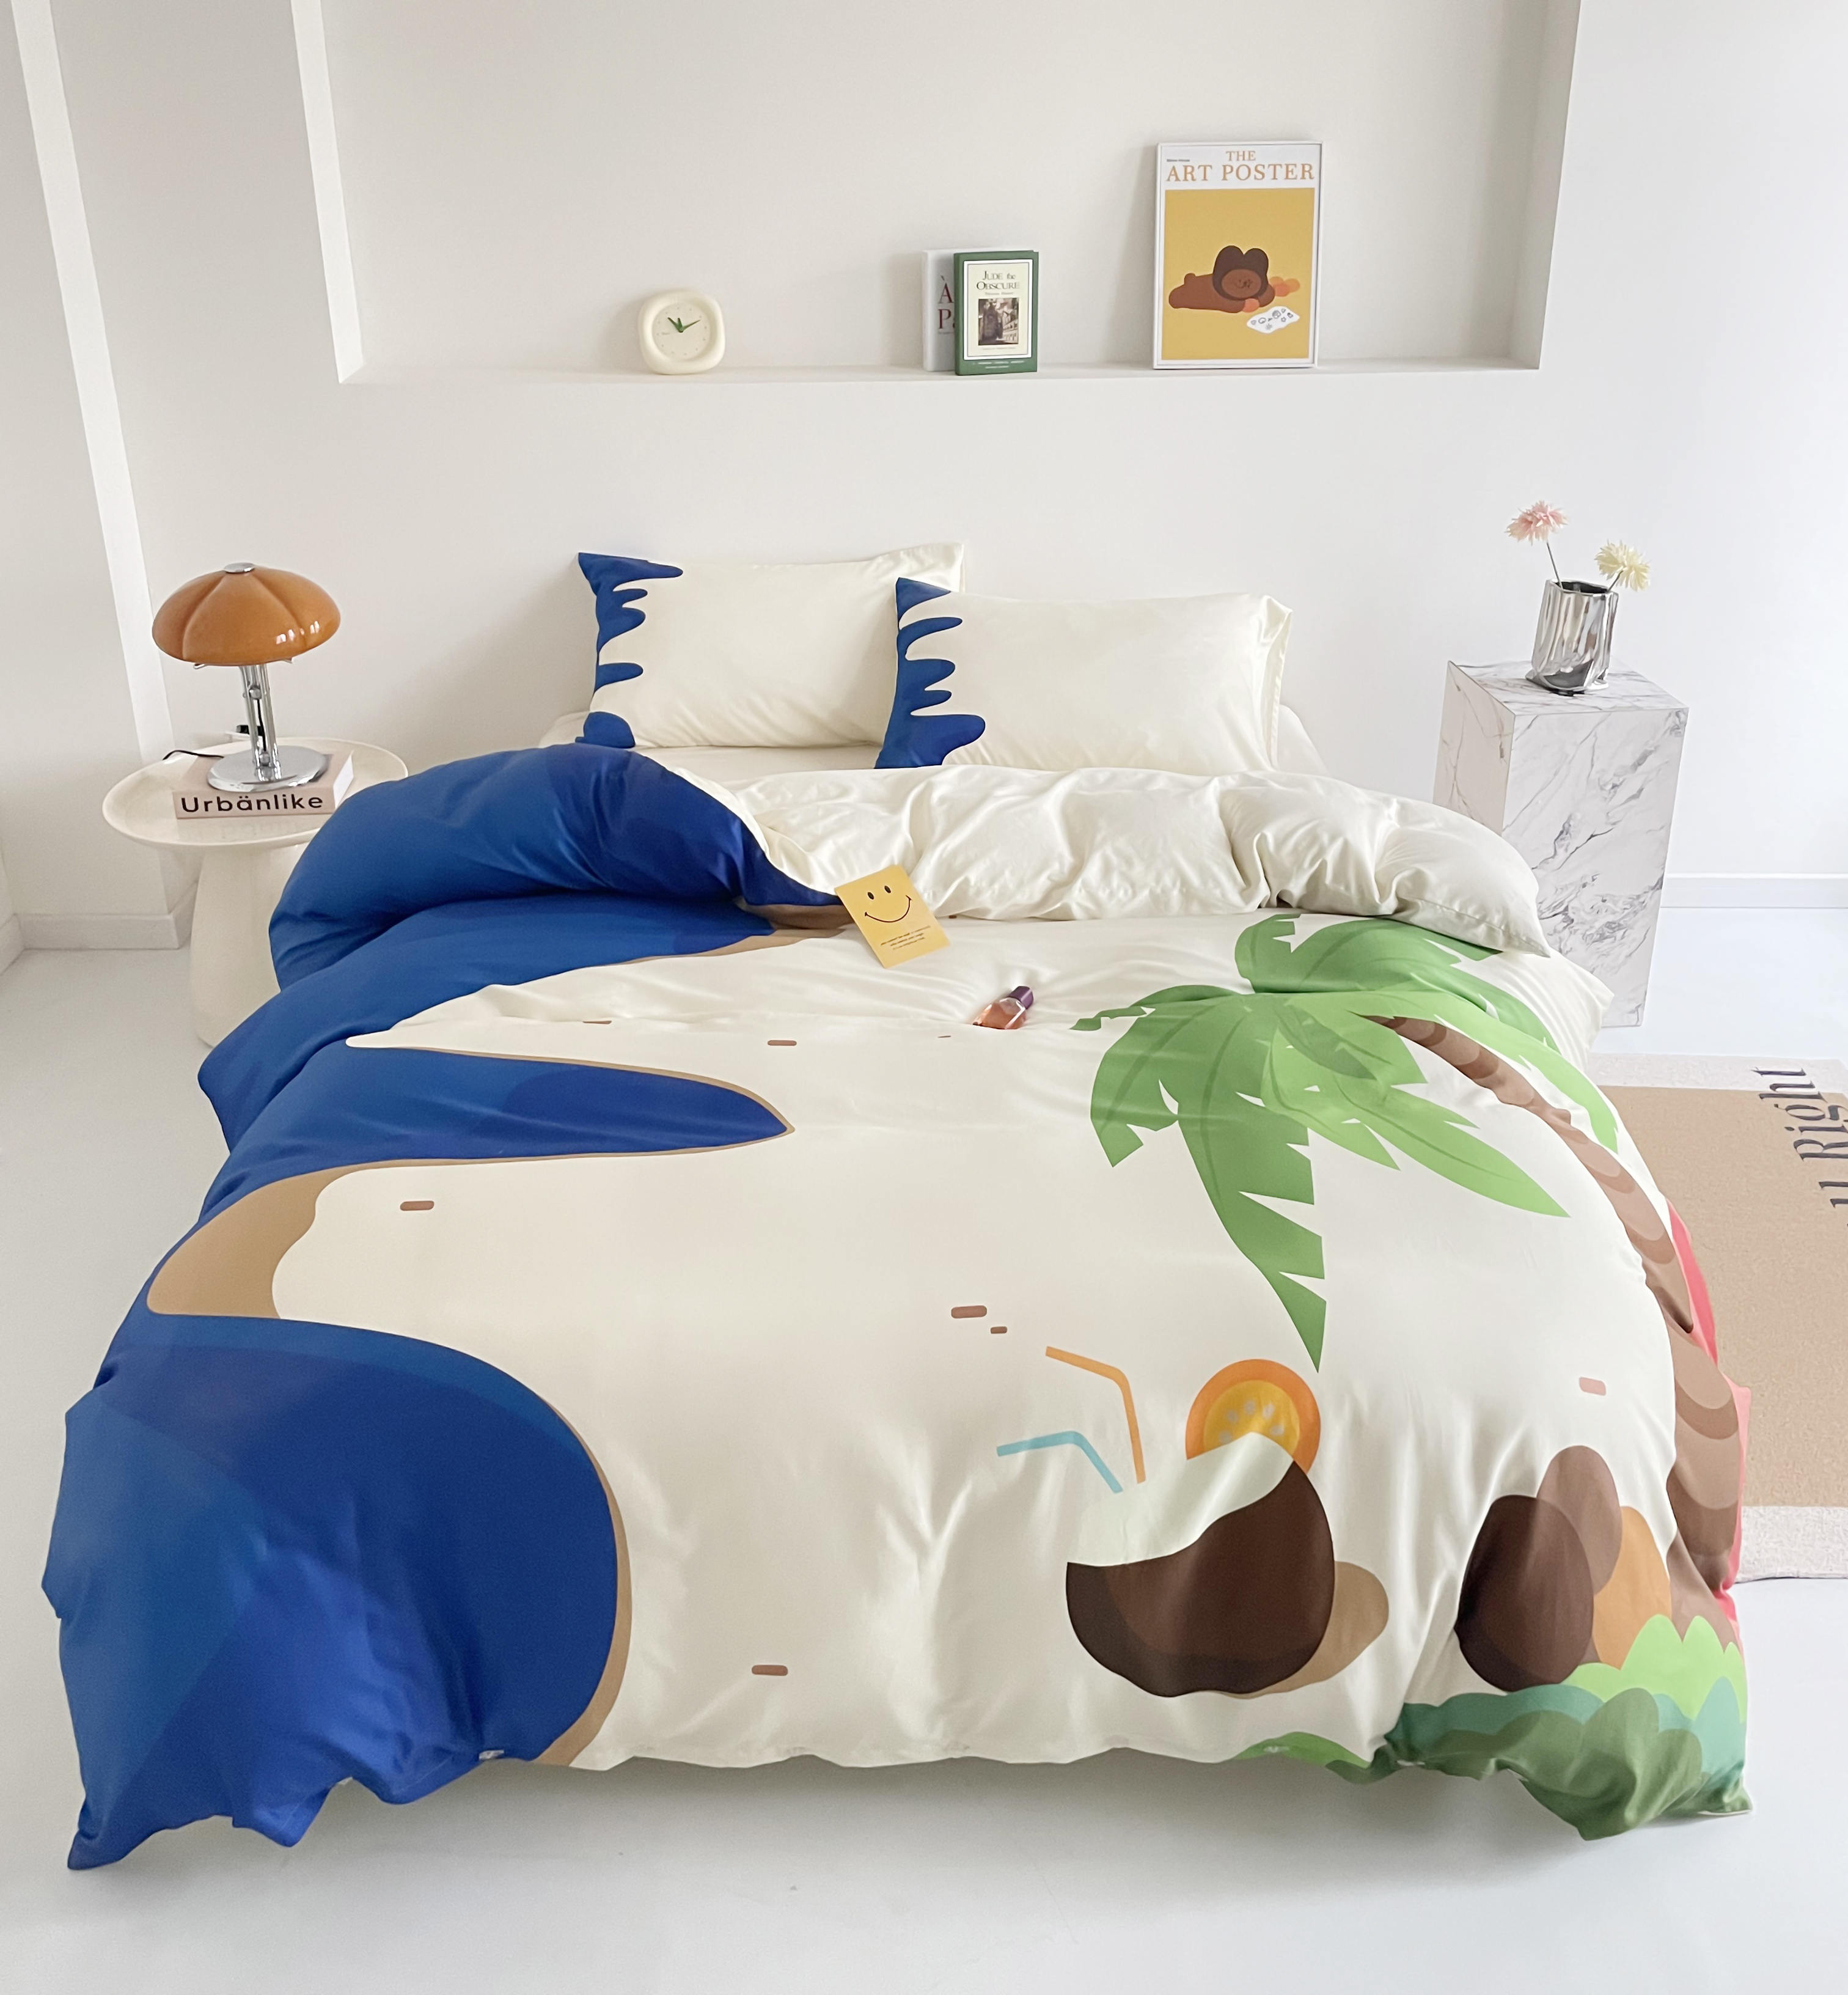 The duvet cover features a palm tree pattern with coconut trees and coconuts